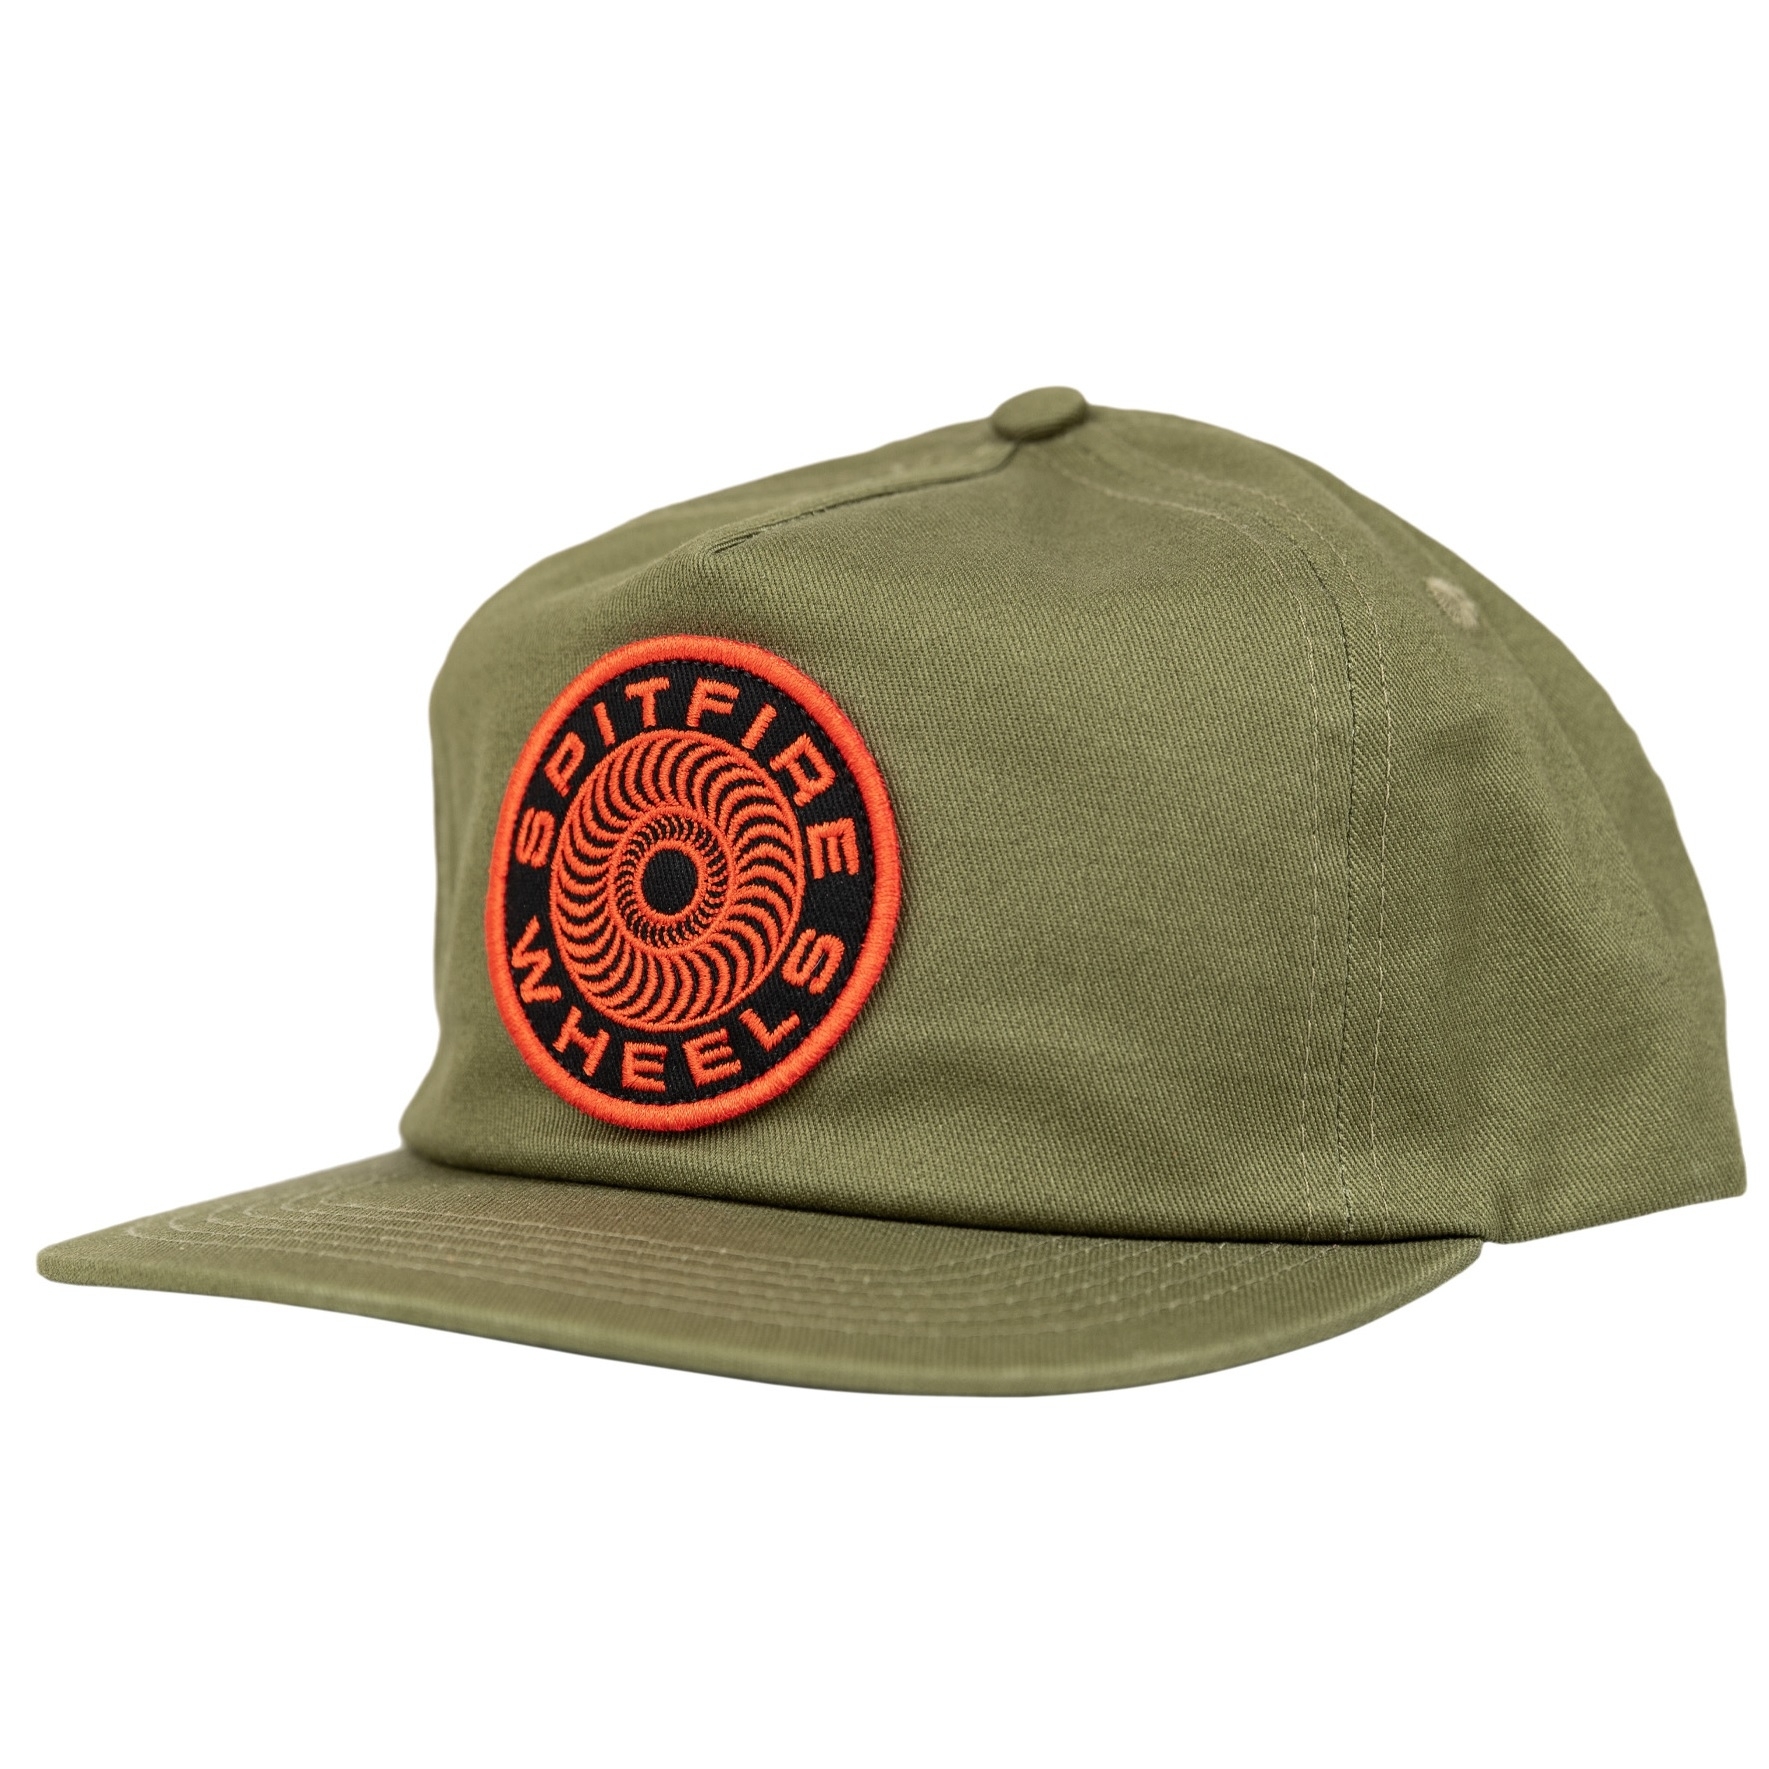 Classic '87 Swirl Patch Snapback (Olive/Red/Black)